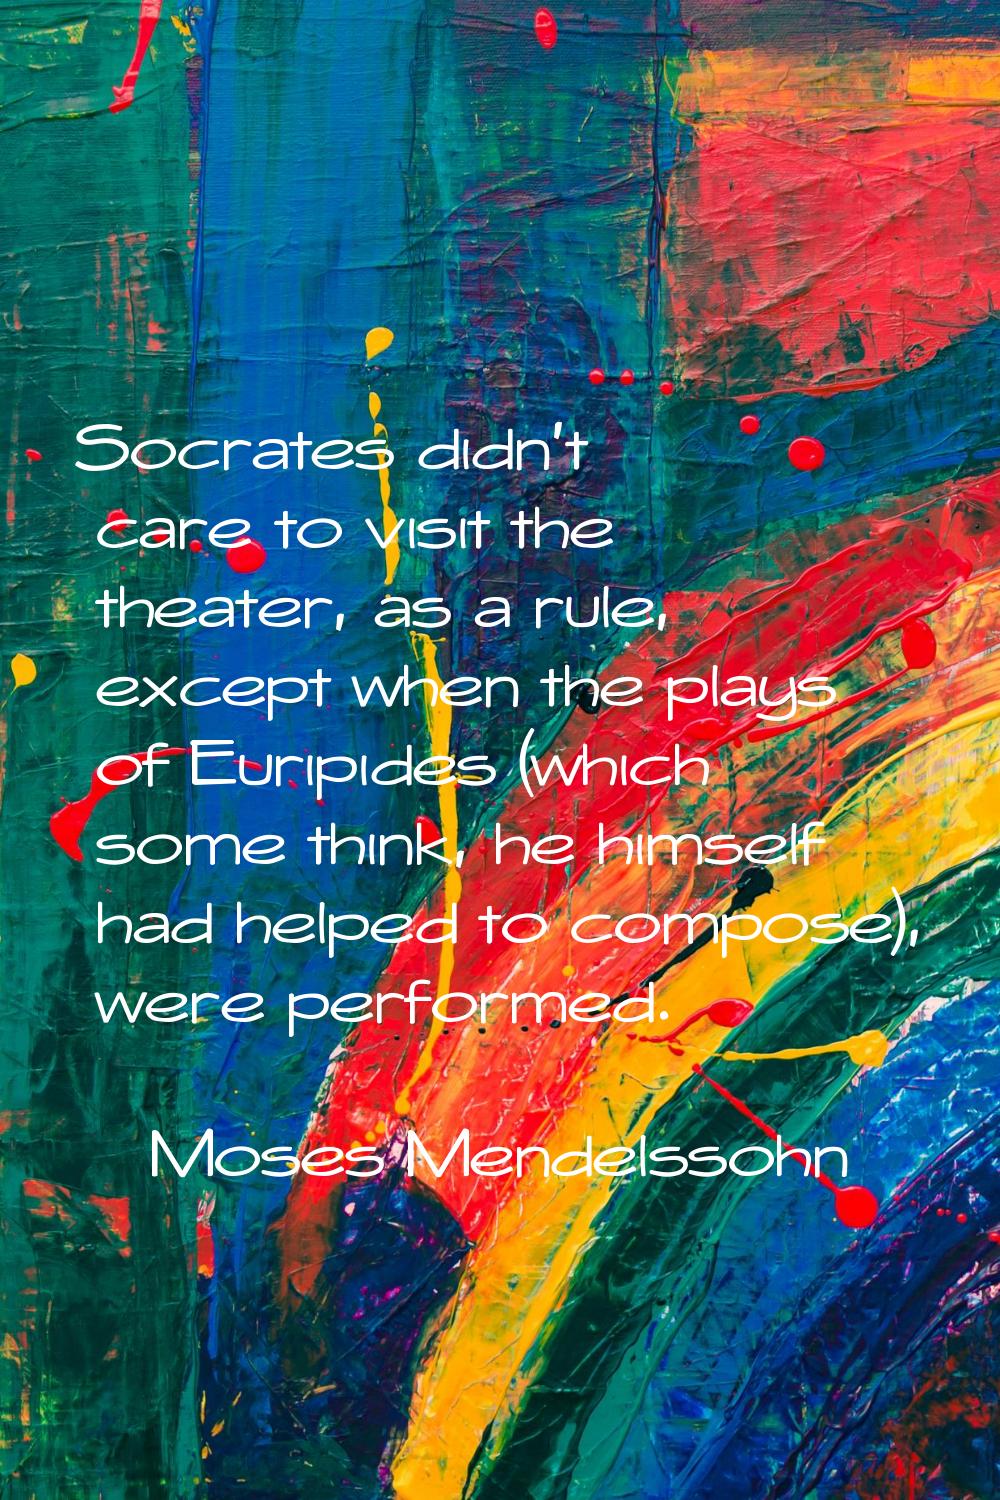 Socrates didn't care to visit the theater, as a rule, except when the plays of Euripides (which som